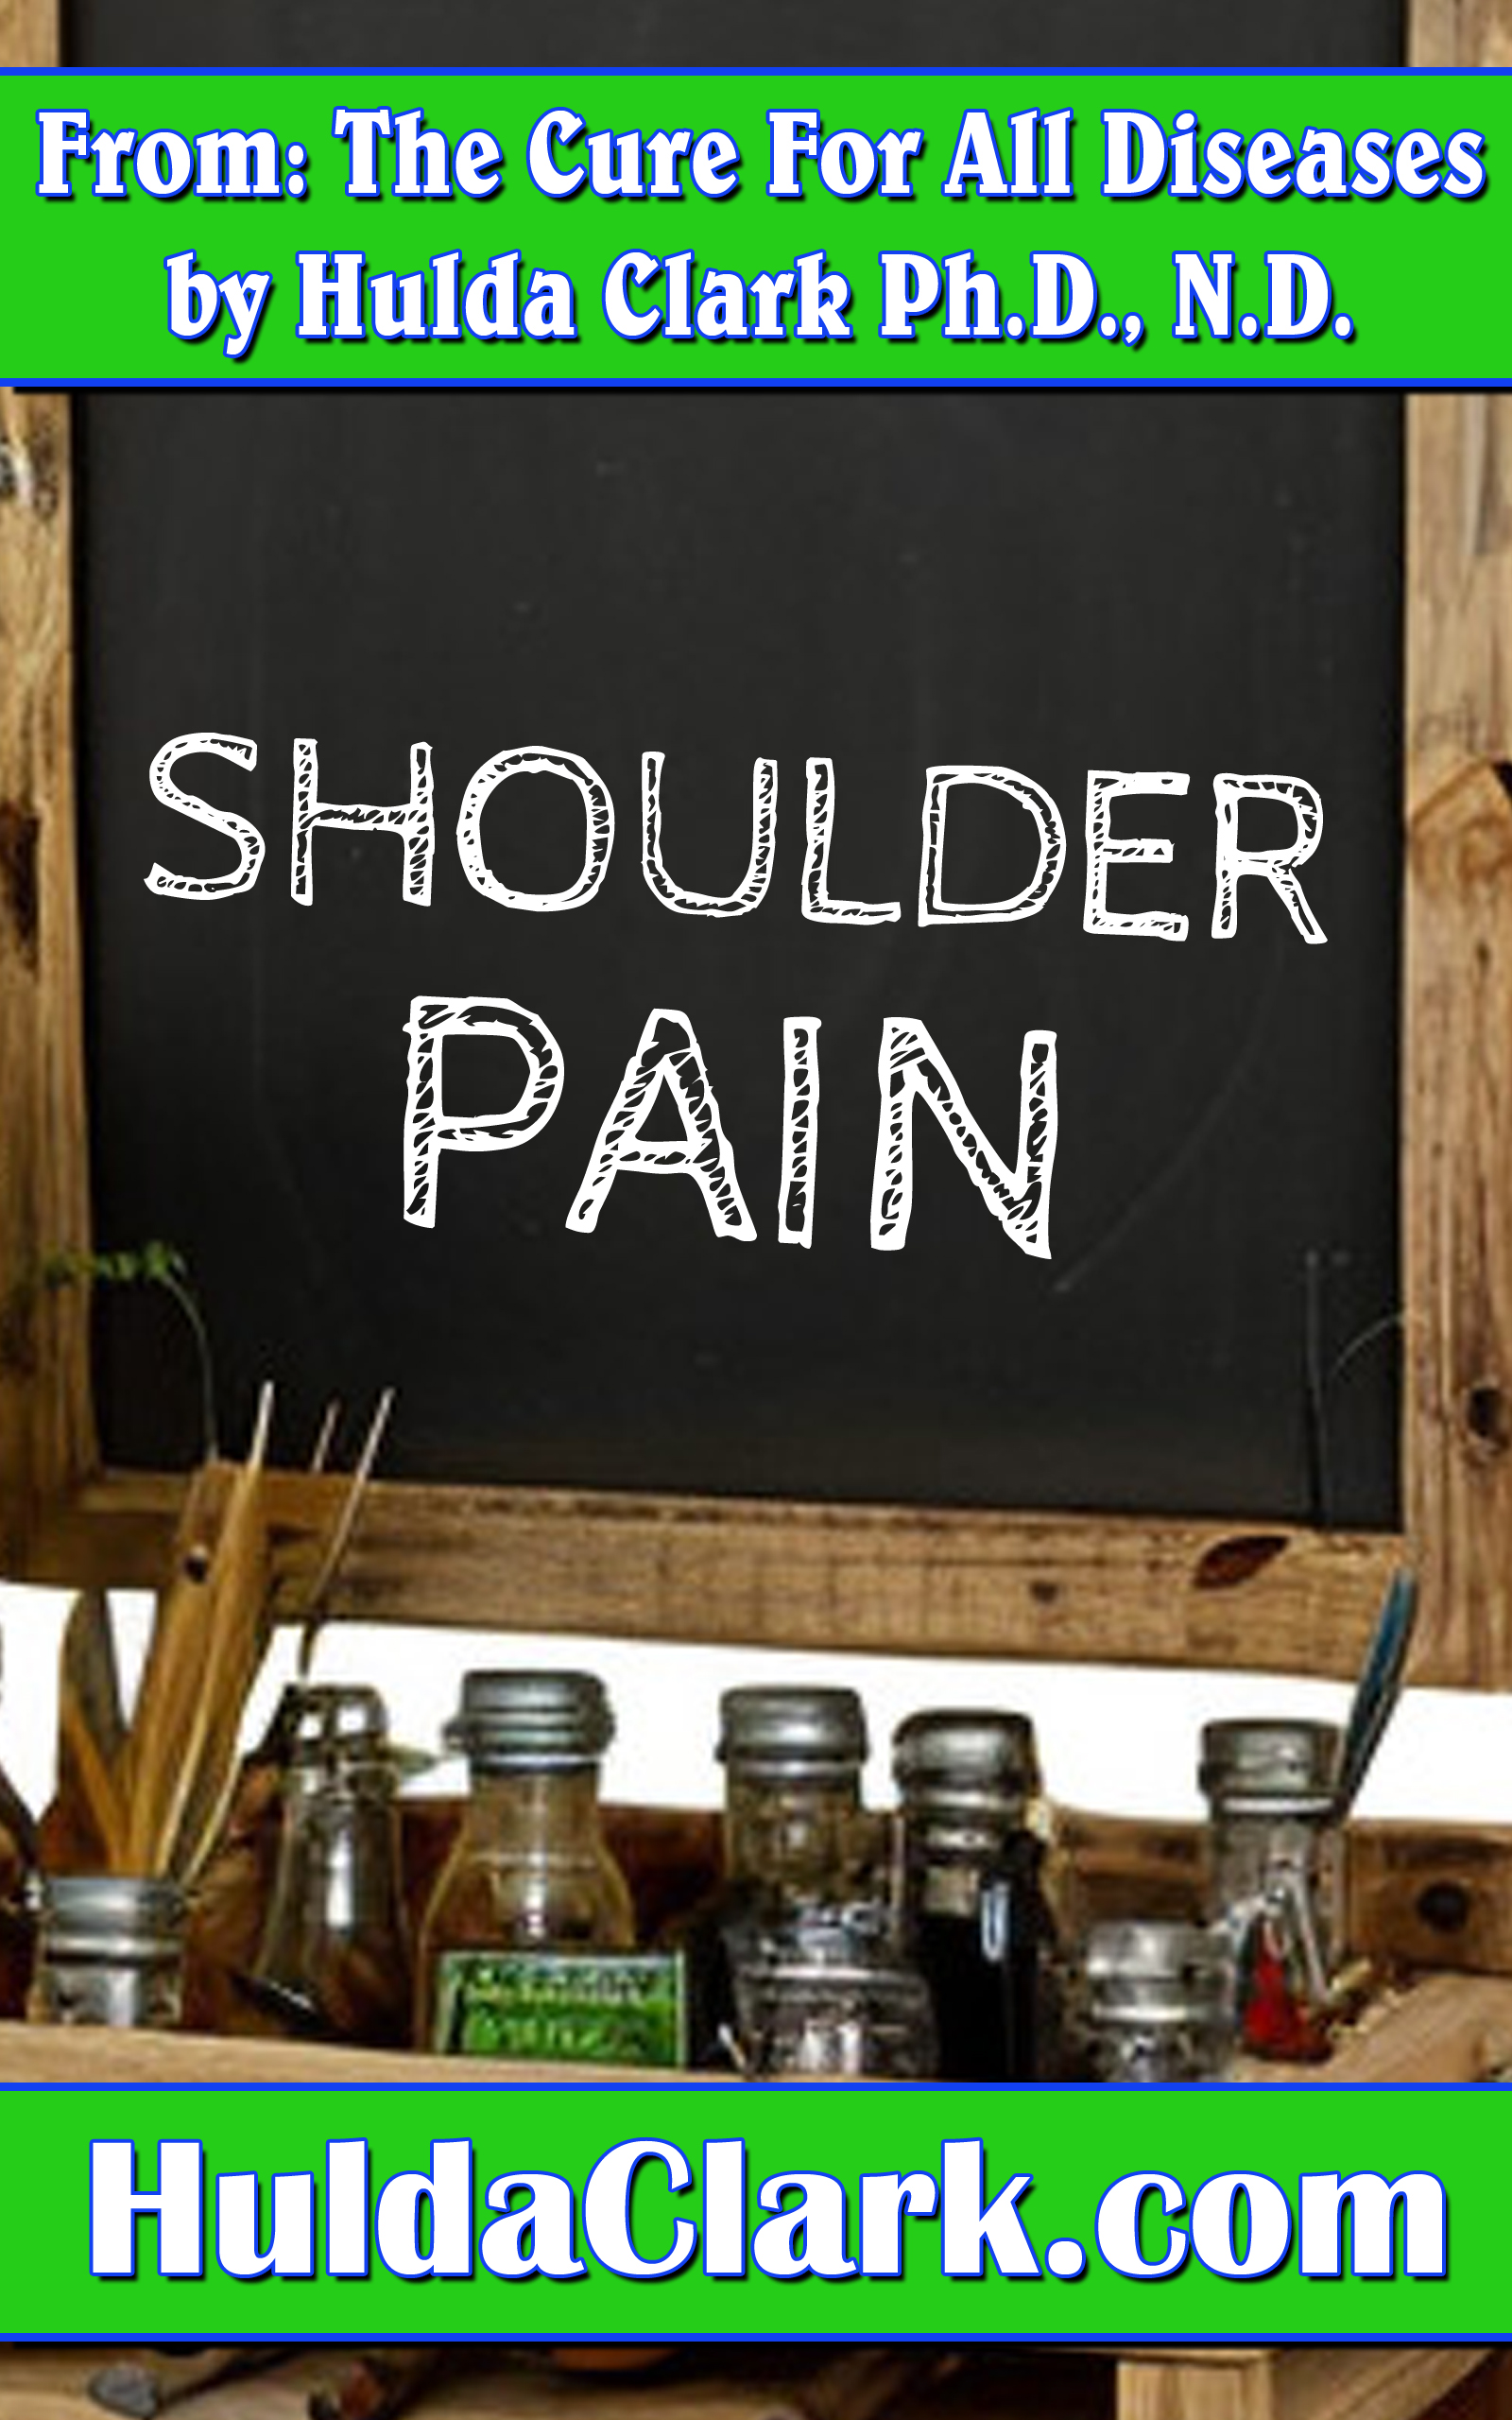 Shoulder Pain Ebook excerpt from The Cure for All Diseases by Hulda Clark